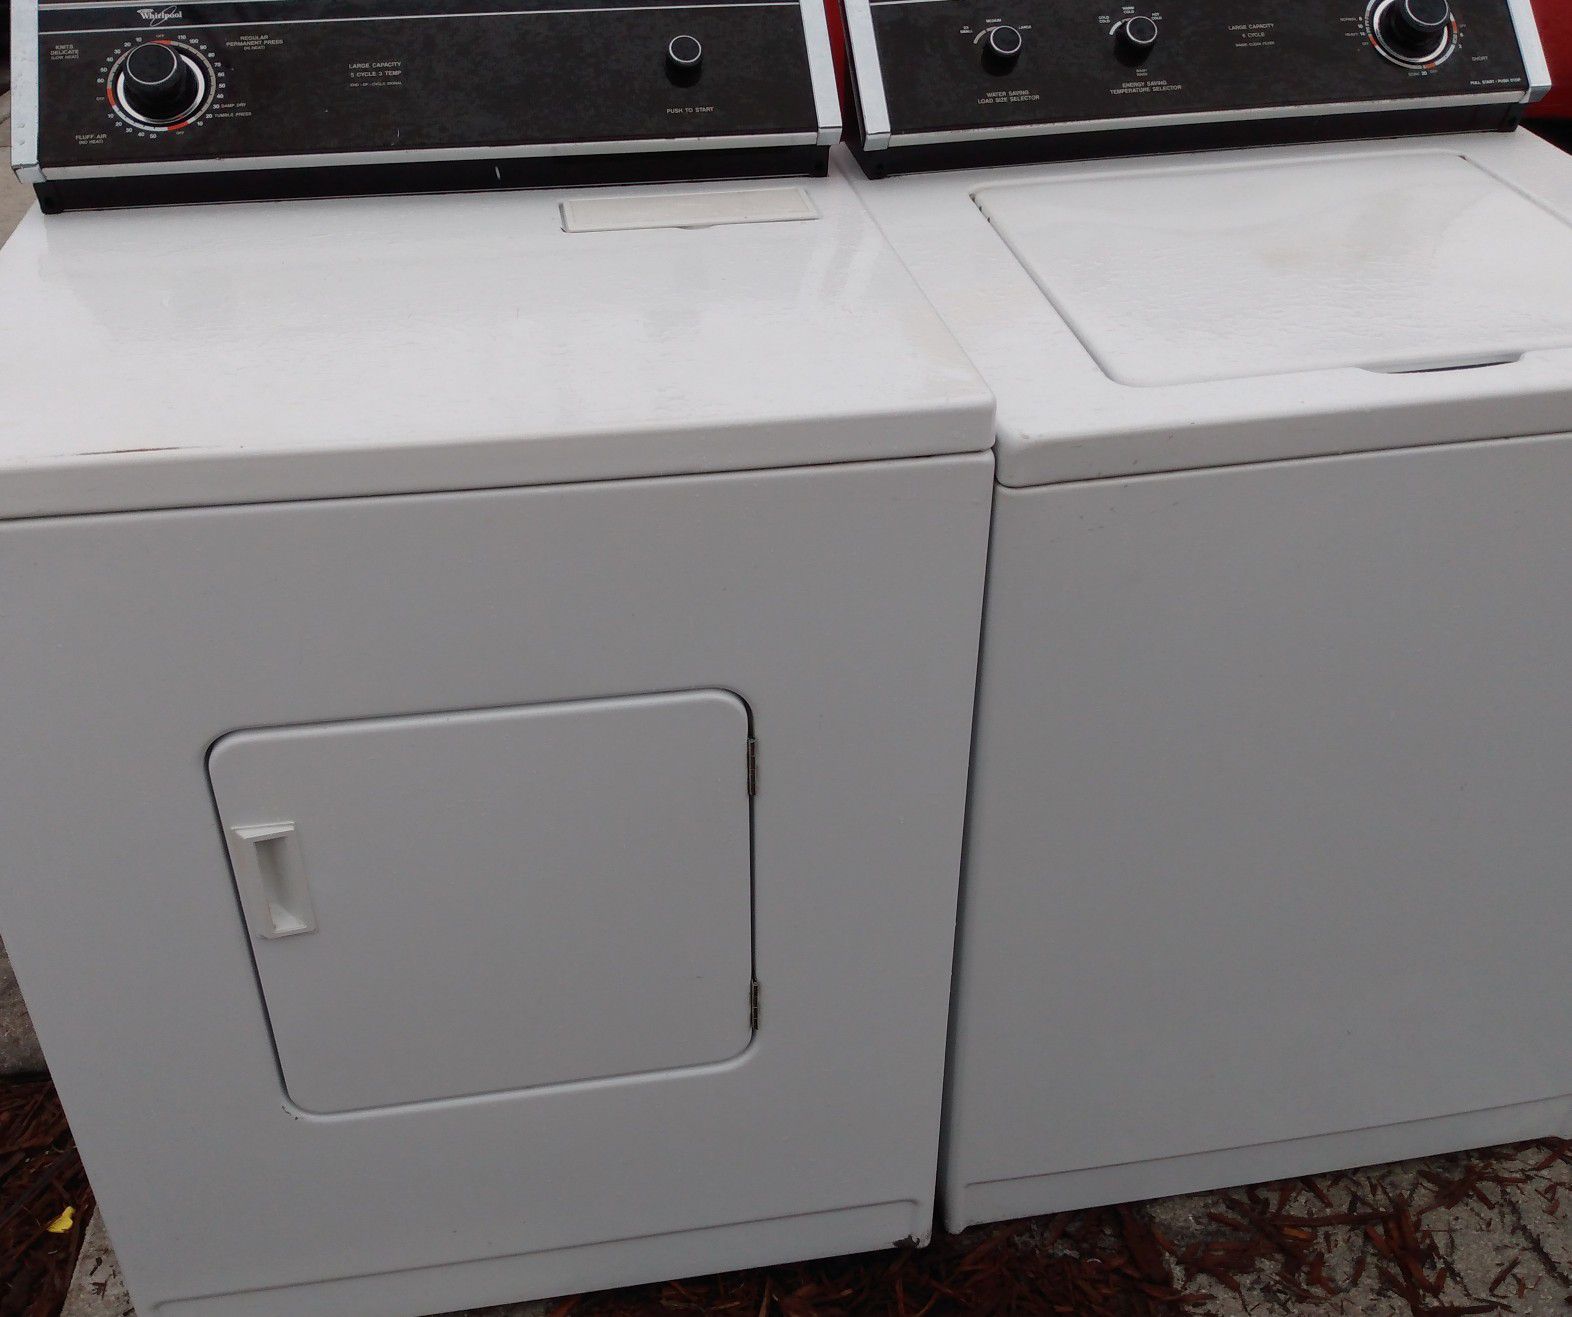 SUPER STRONG HEAVY DUTY WASHER DRYER SET PRICE FIRM